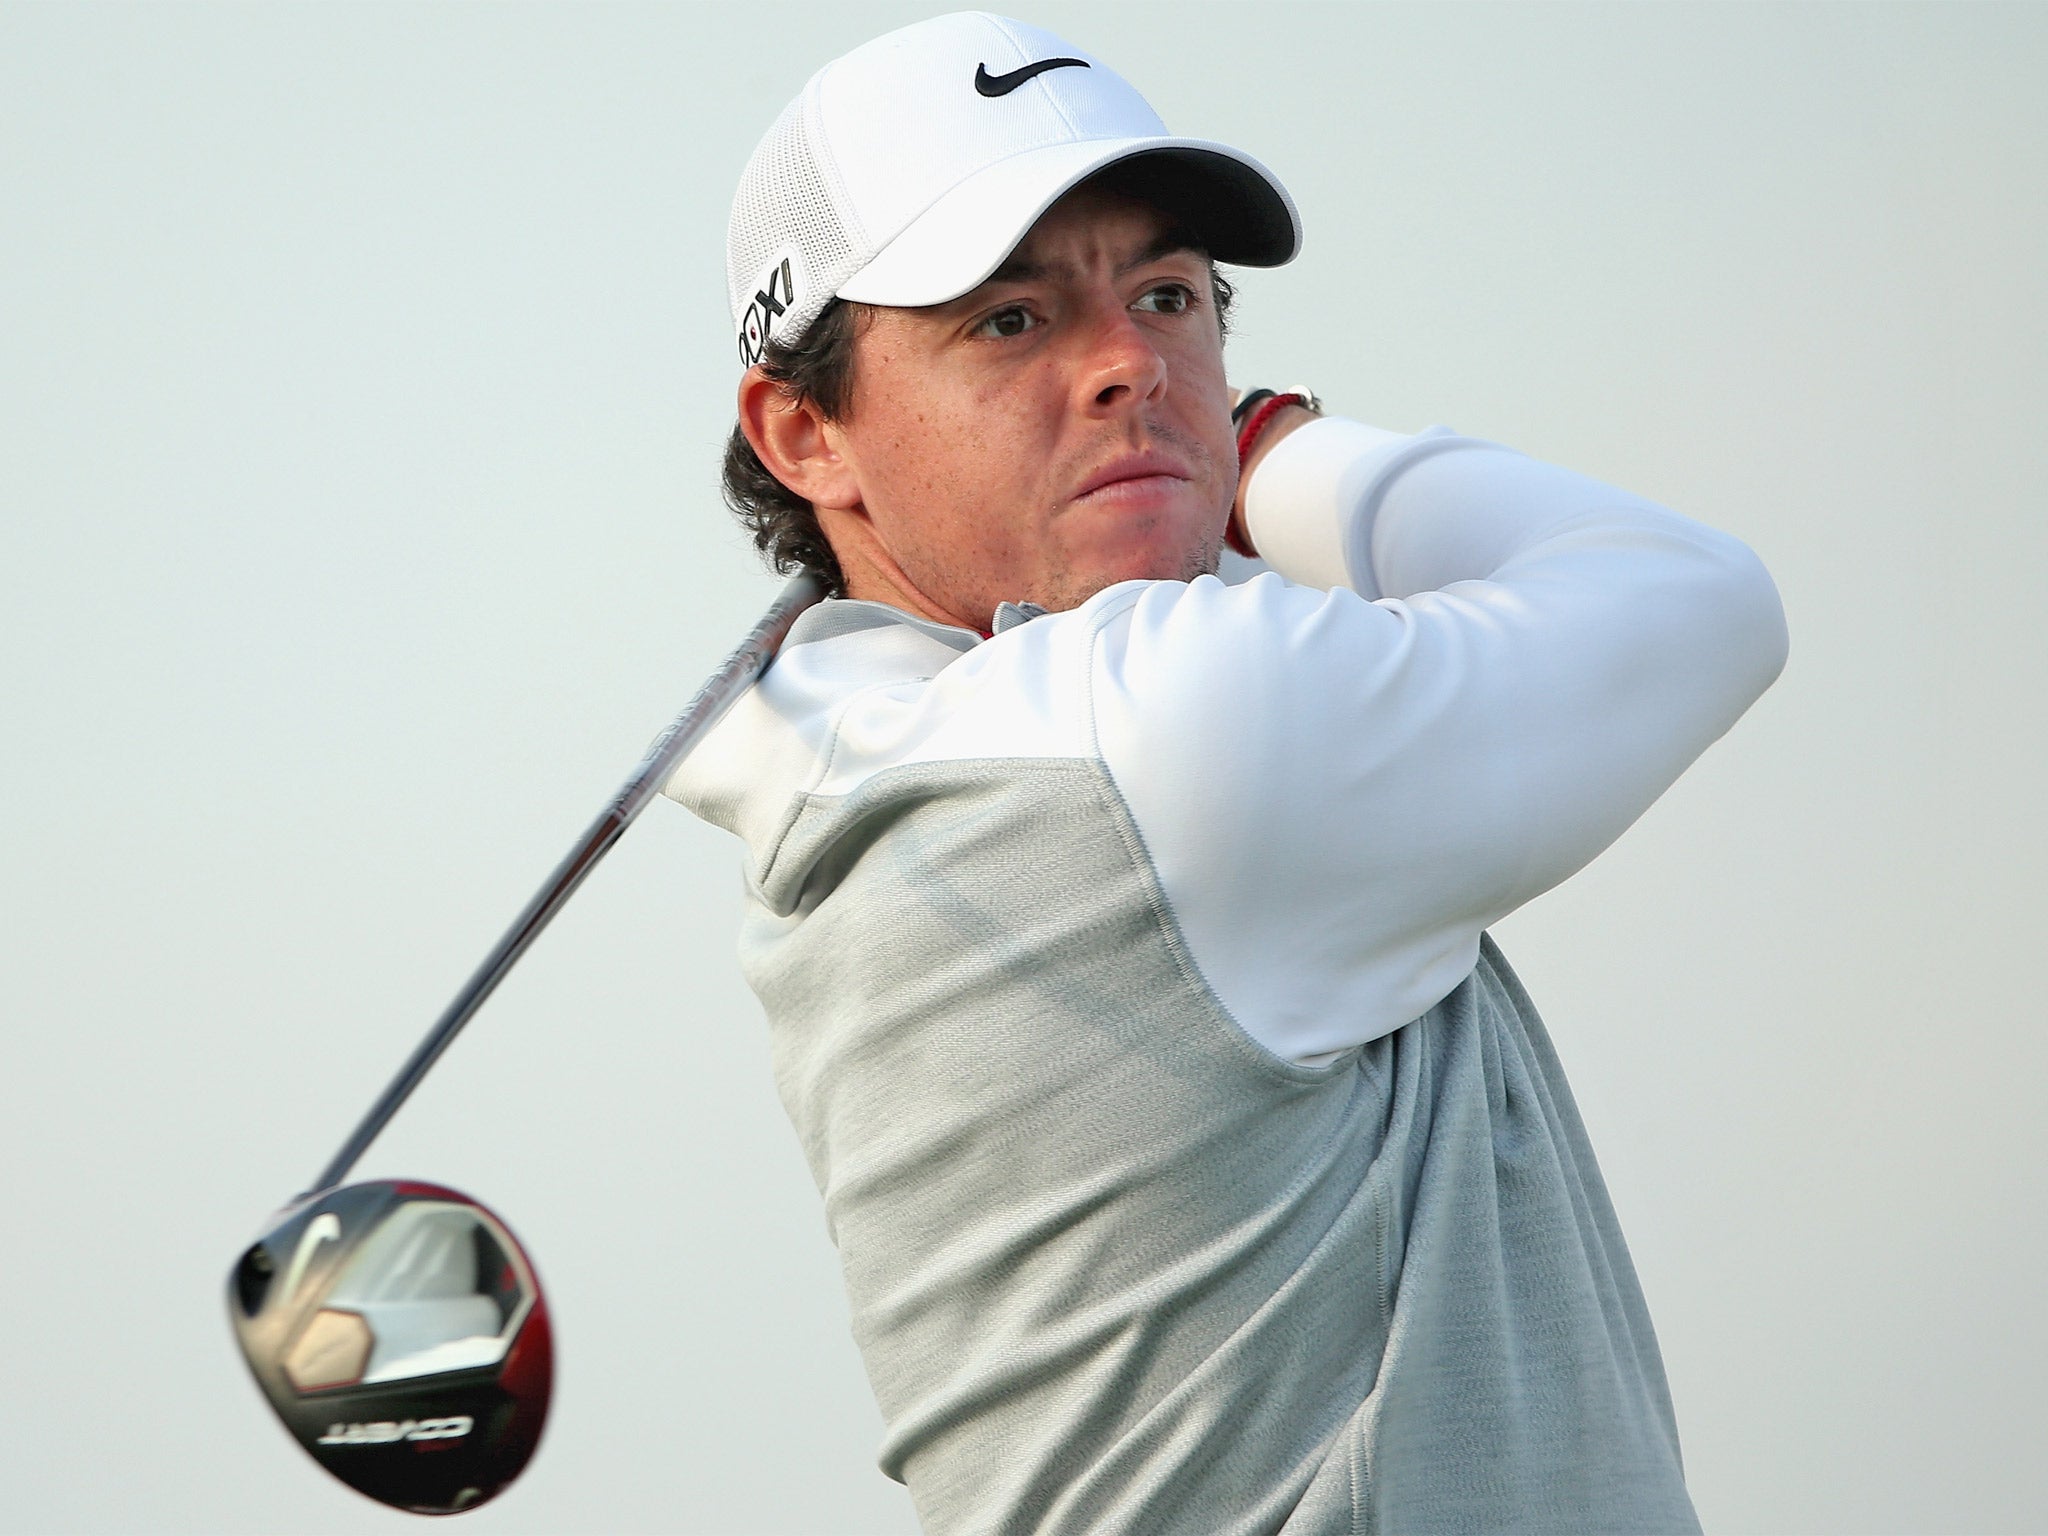 'Everything is falling back into place,' says McIlroy